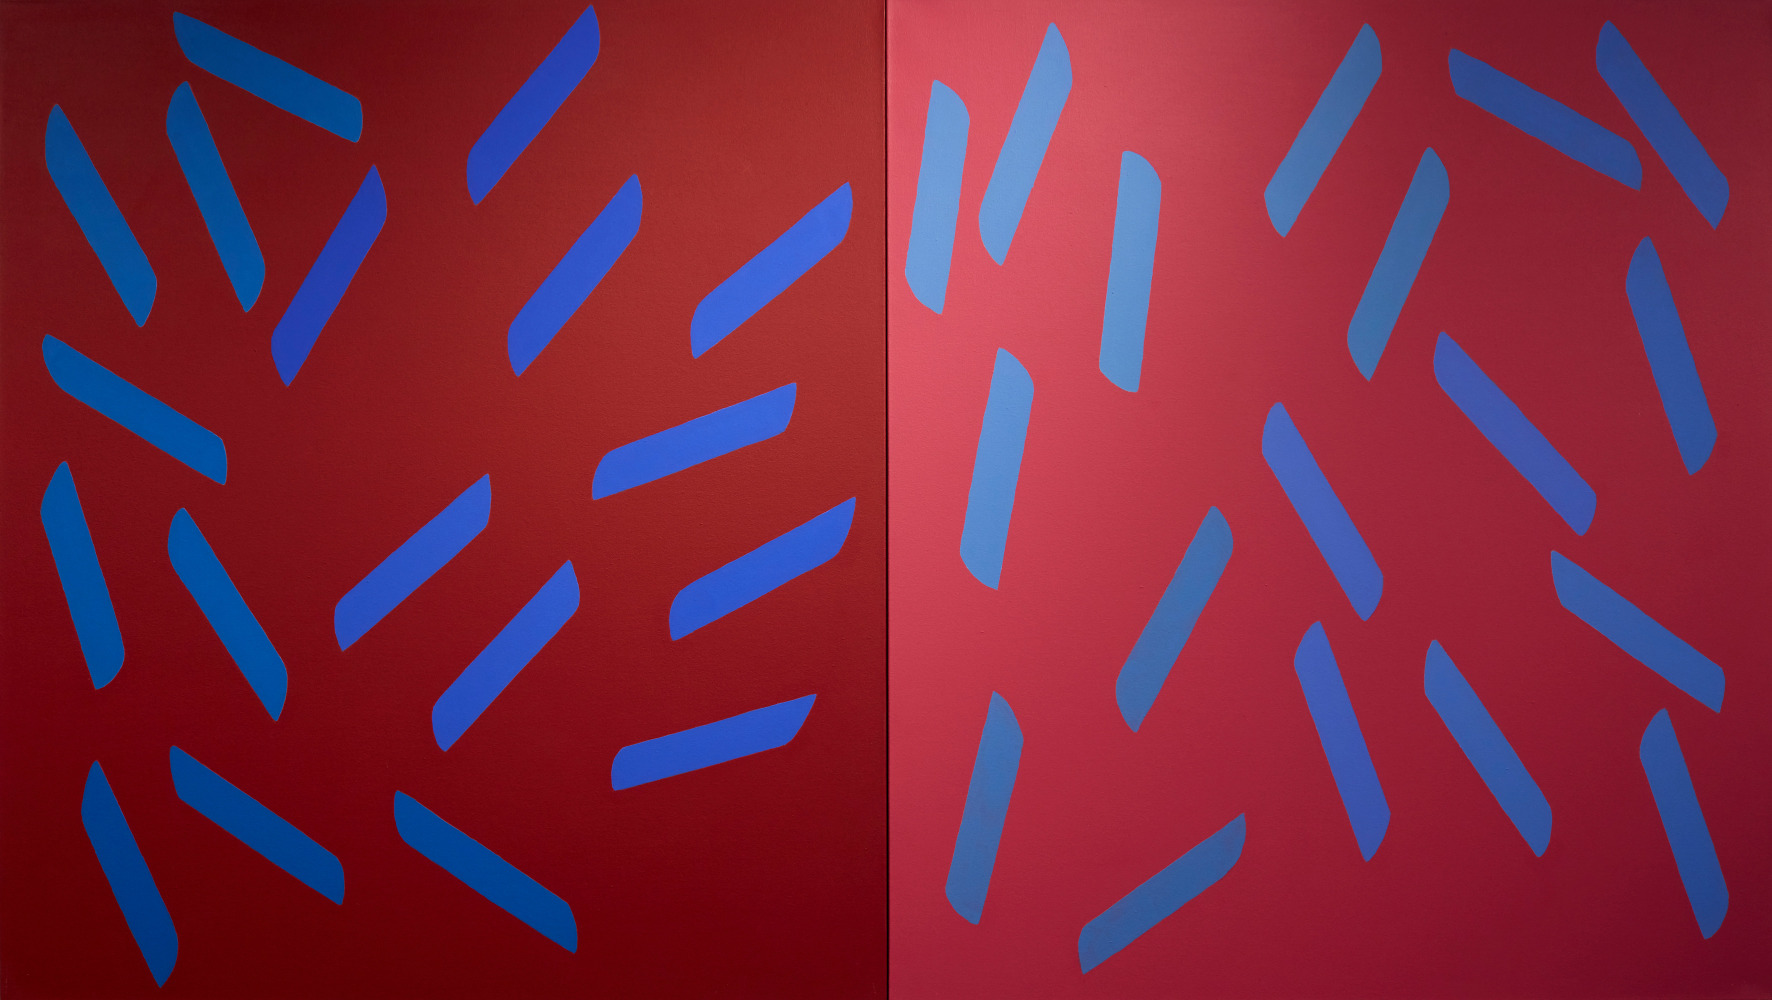 Untitled (Red,Red) ,2013
Acrylicon Canvas
52 x 92 inches